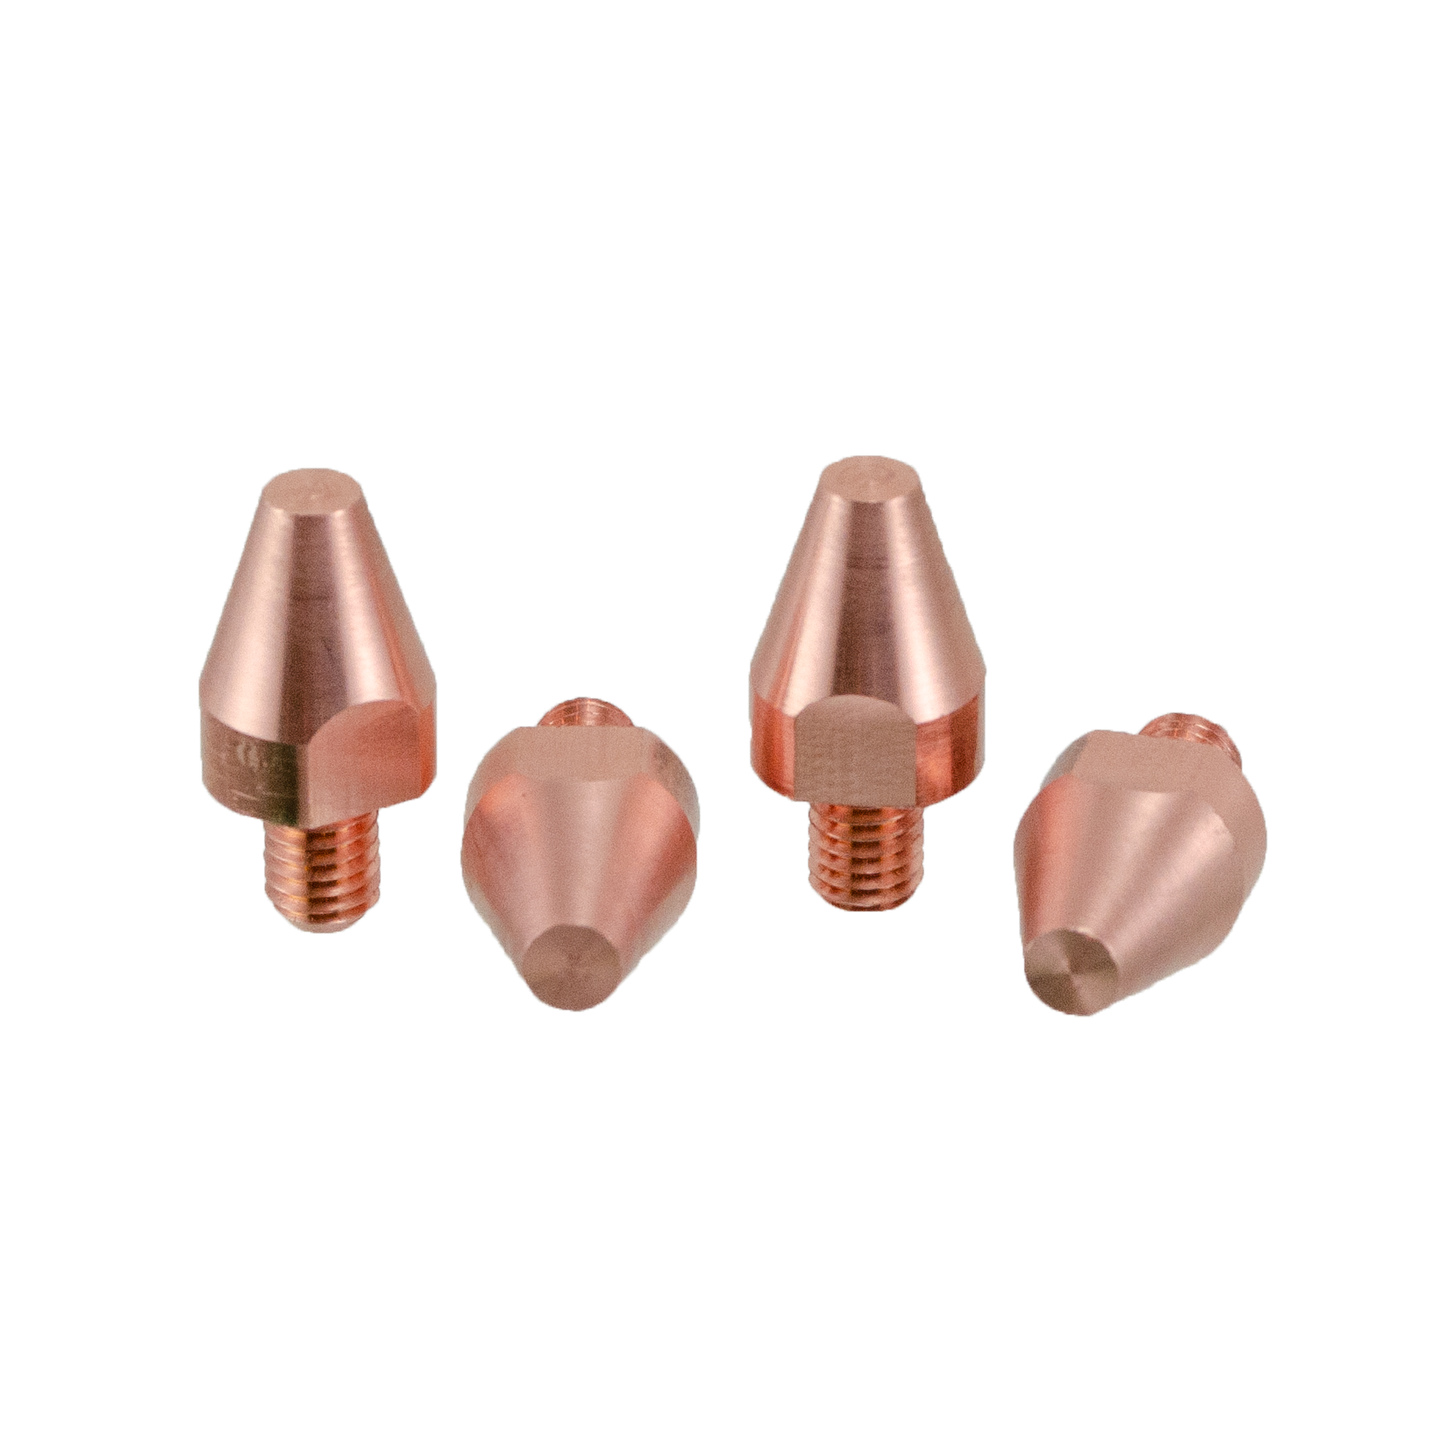 Spot Welding Tips w/ 1/4" Contact Area - Fits Chicago Electric Spot Welders - 2 Pairs